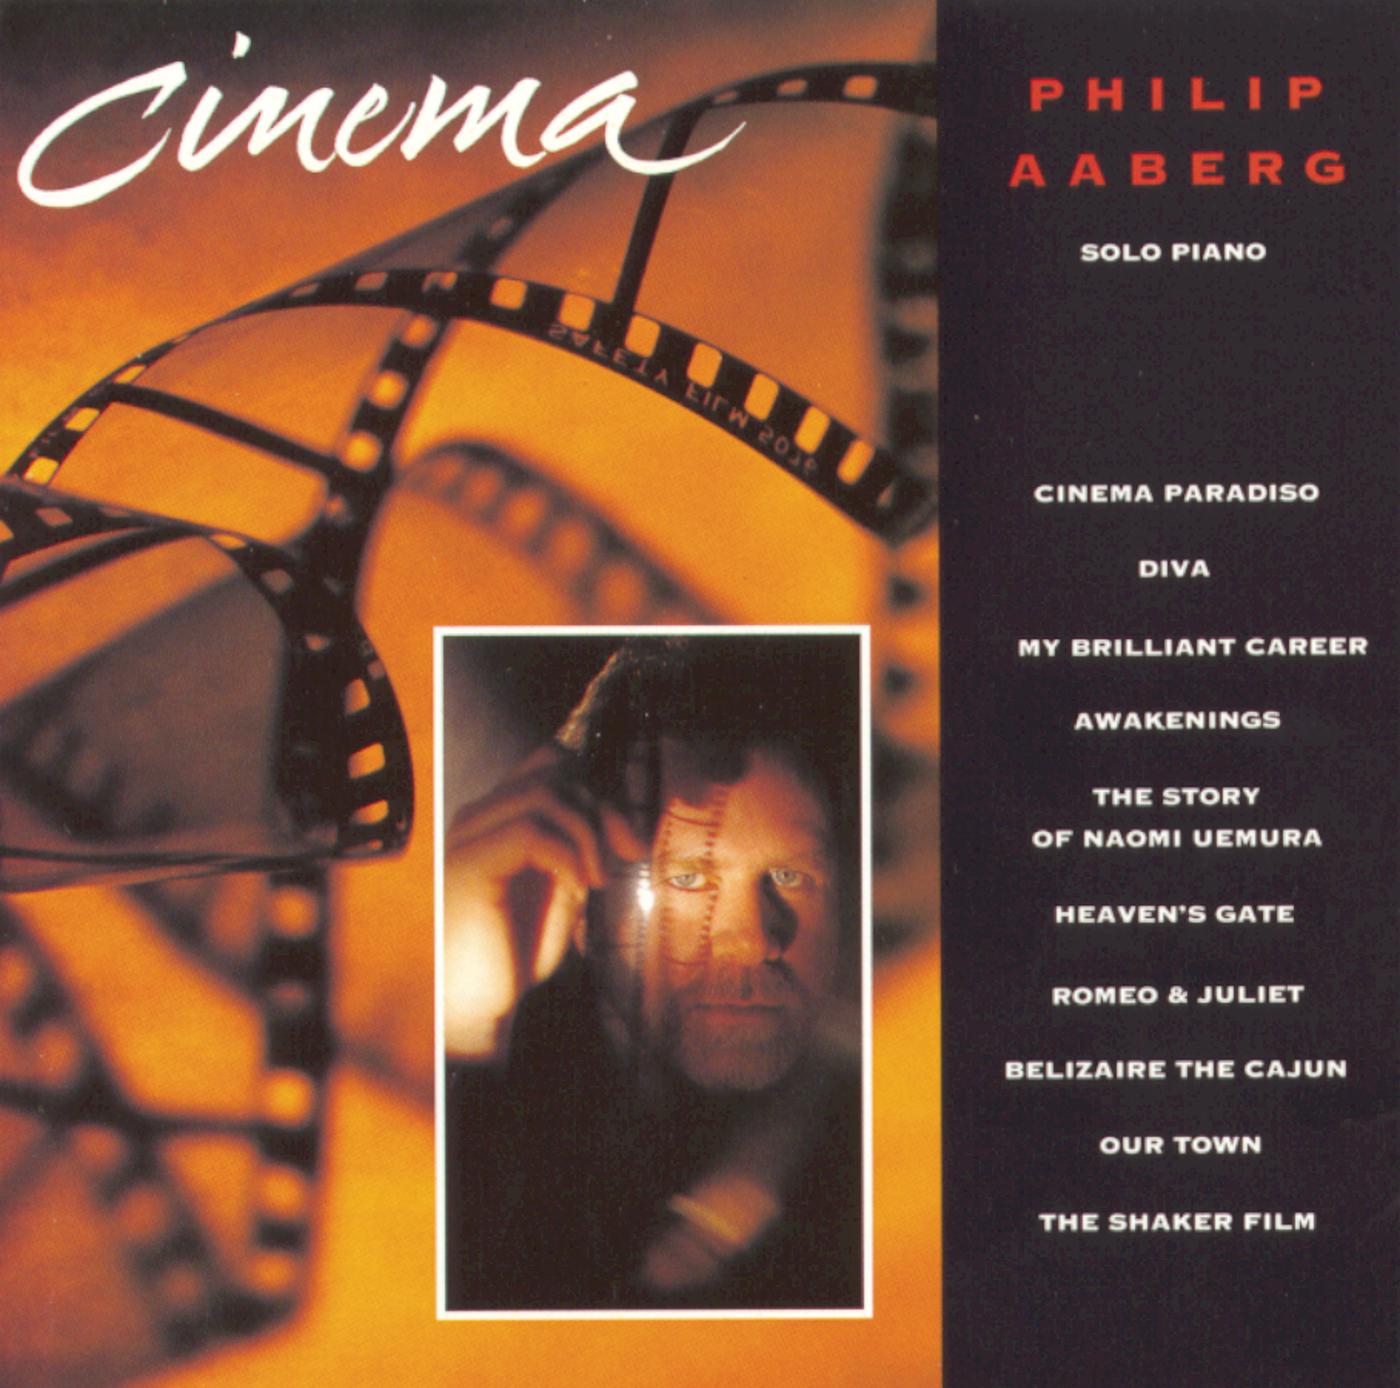 Philip Aaberg - Cinema Paradiso - While Thinking About Her Again/First Youth/Maturity